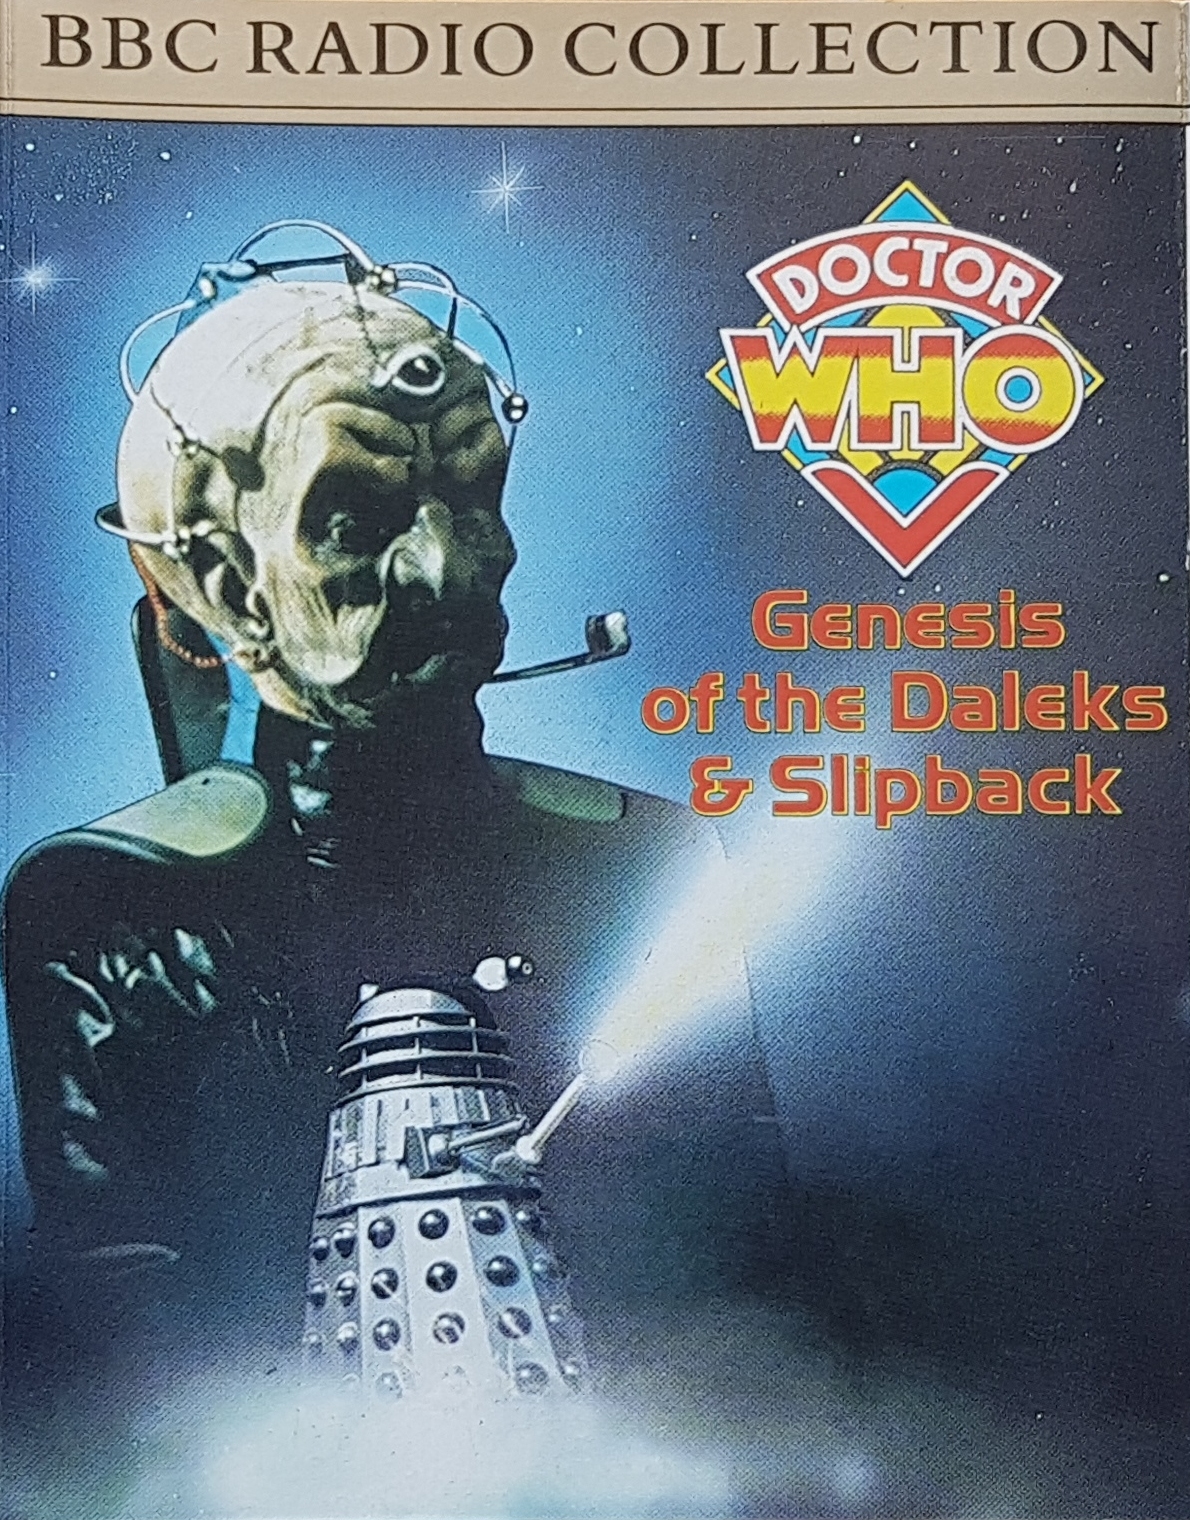 Picture of Doctor Who - Genesis of the Daleks / Slipback by artist Terry Nation / Eric Saward from the BBC cassettes - Records and Tapes library